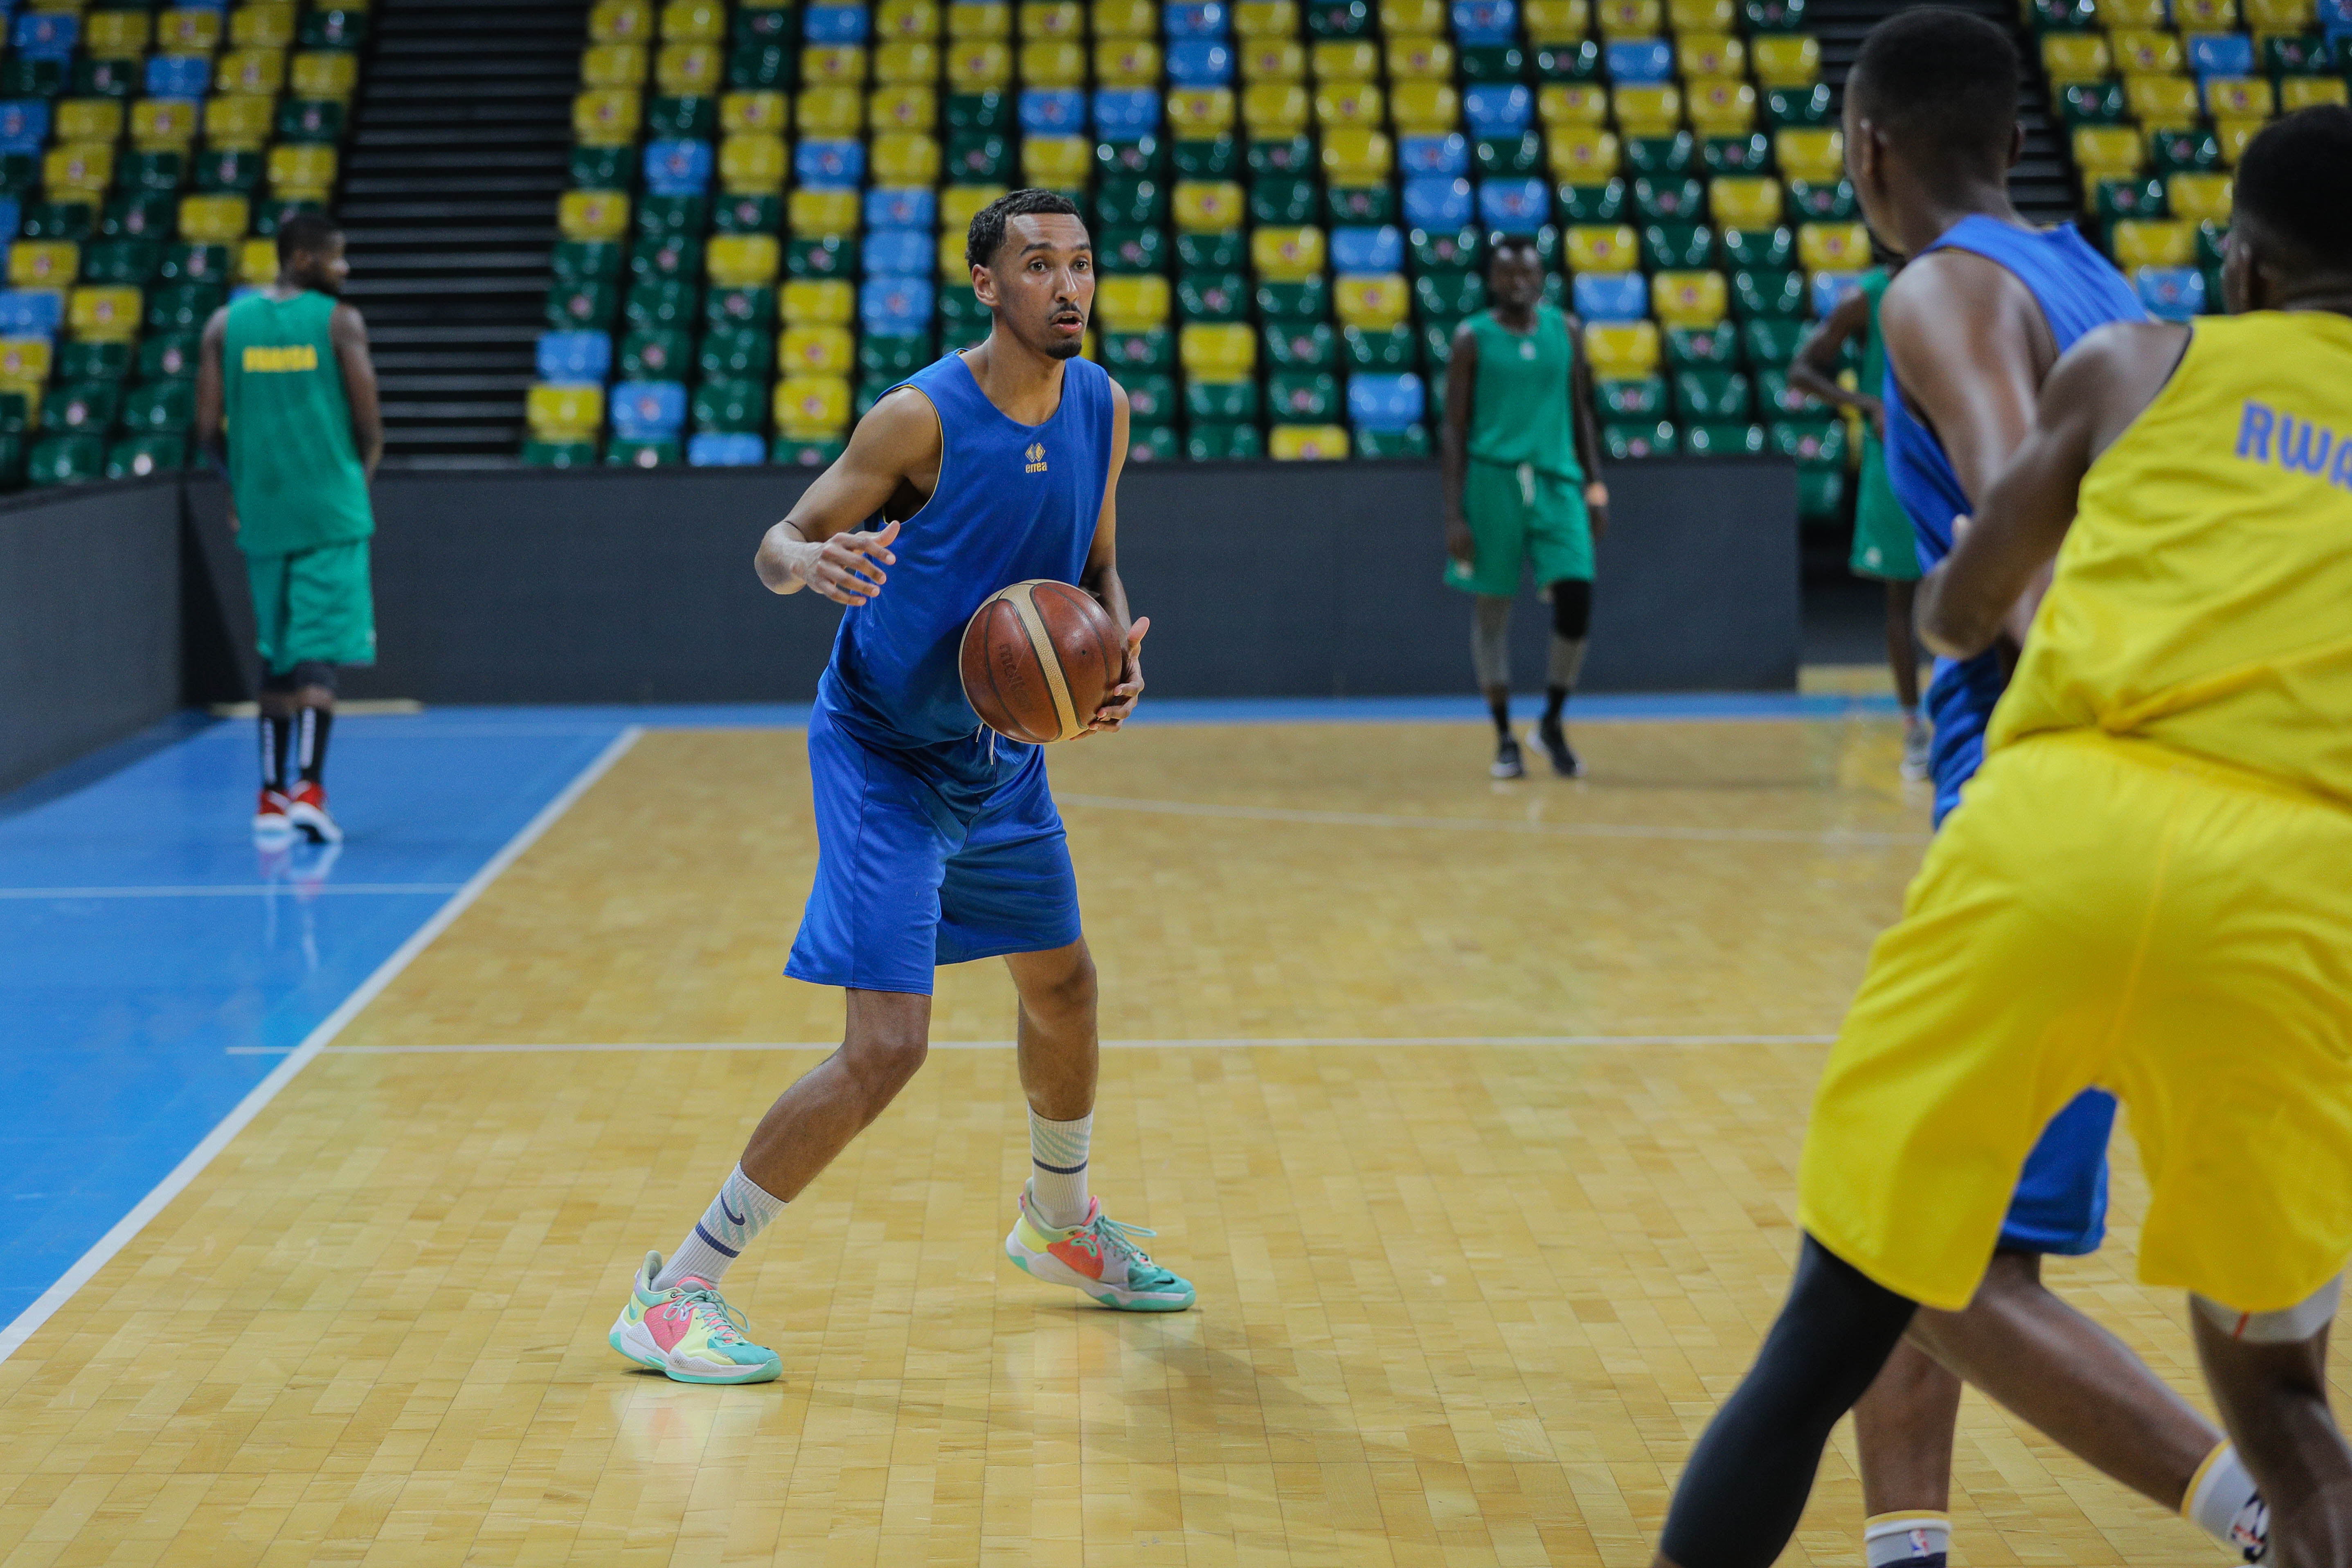 Pierre Thierry Vandriessche during a training session of the national basketball team at the Kigali Arena on February 3. / Dan Nsengiyumva